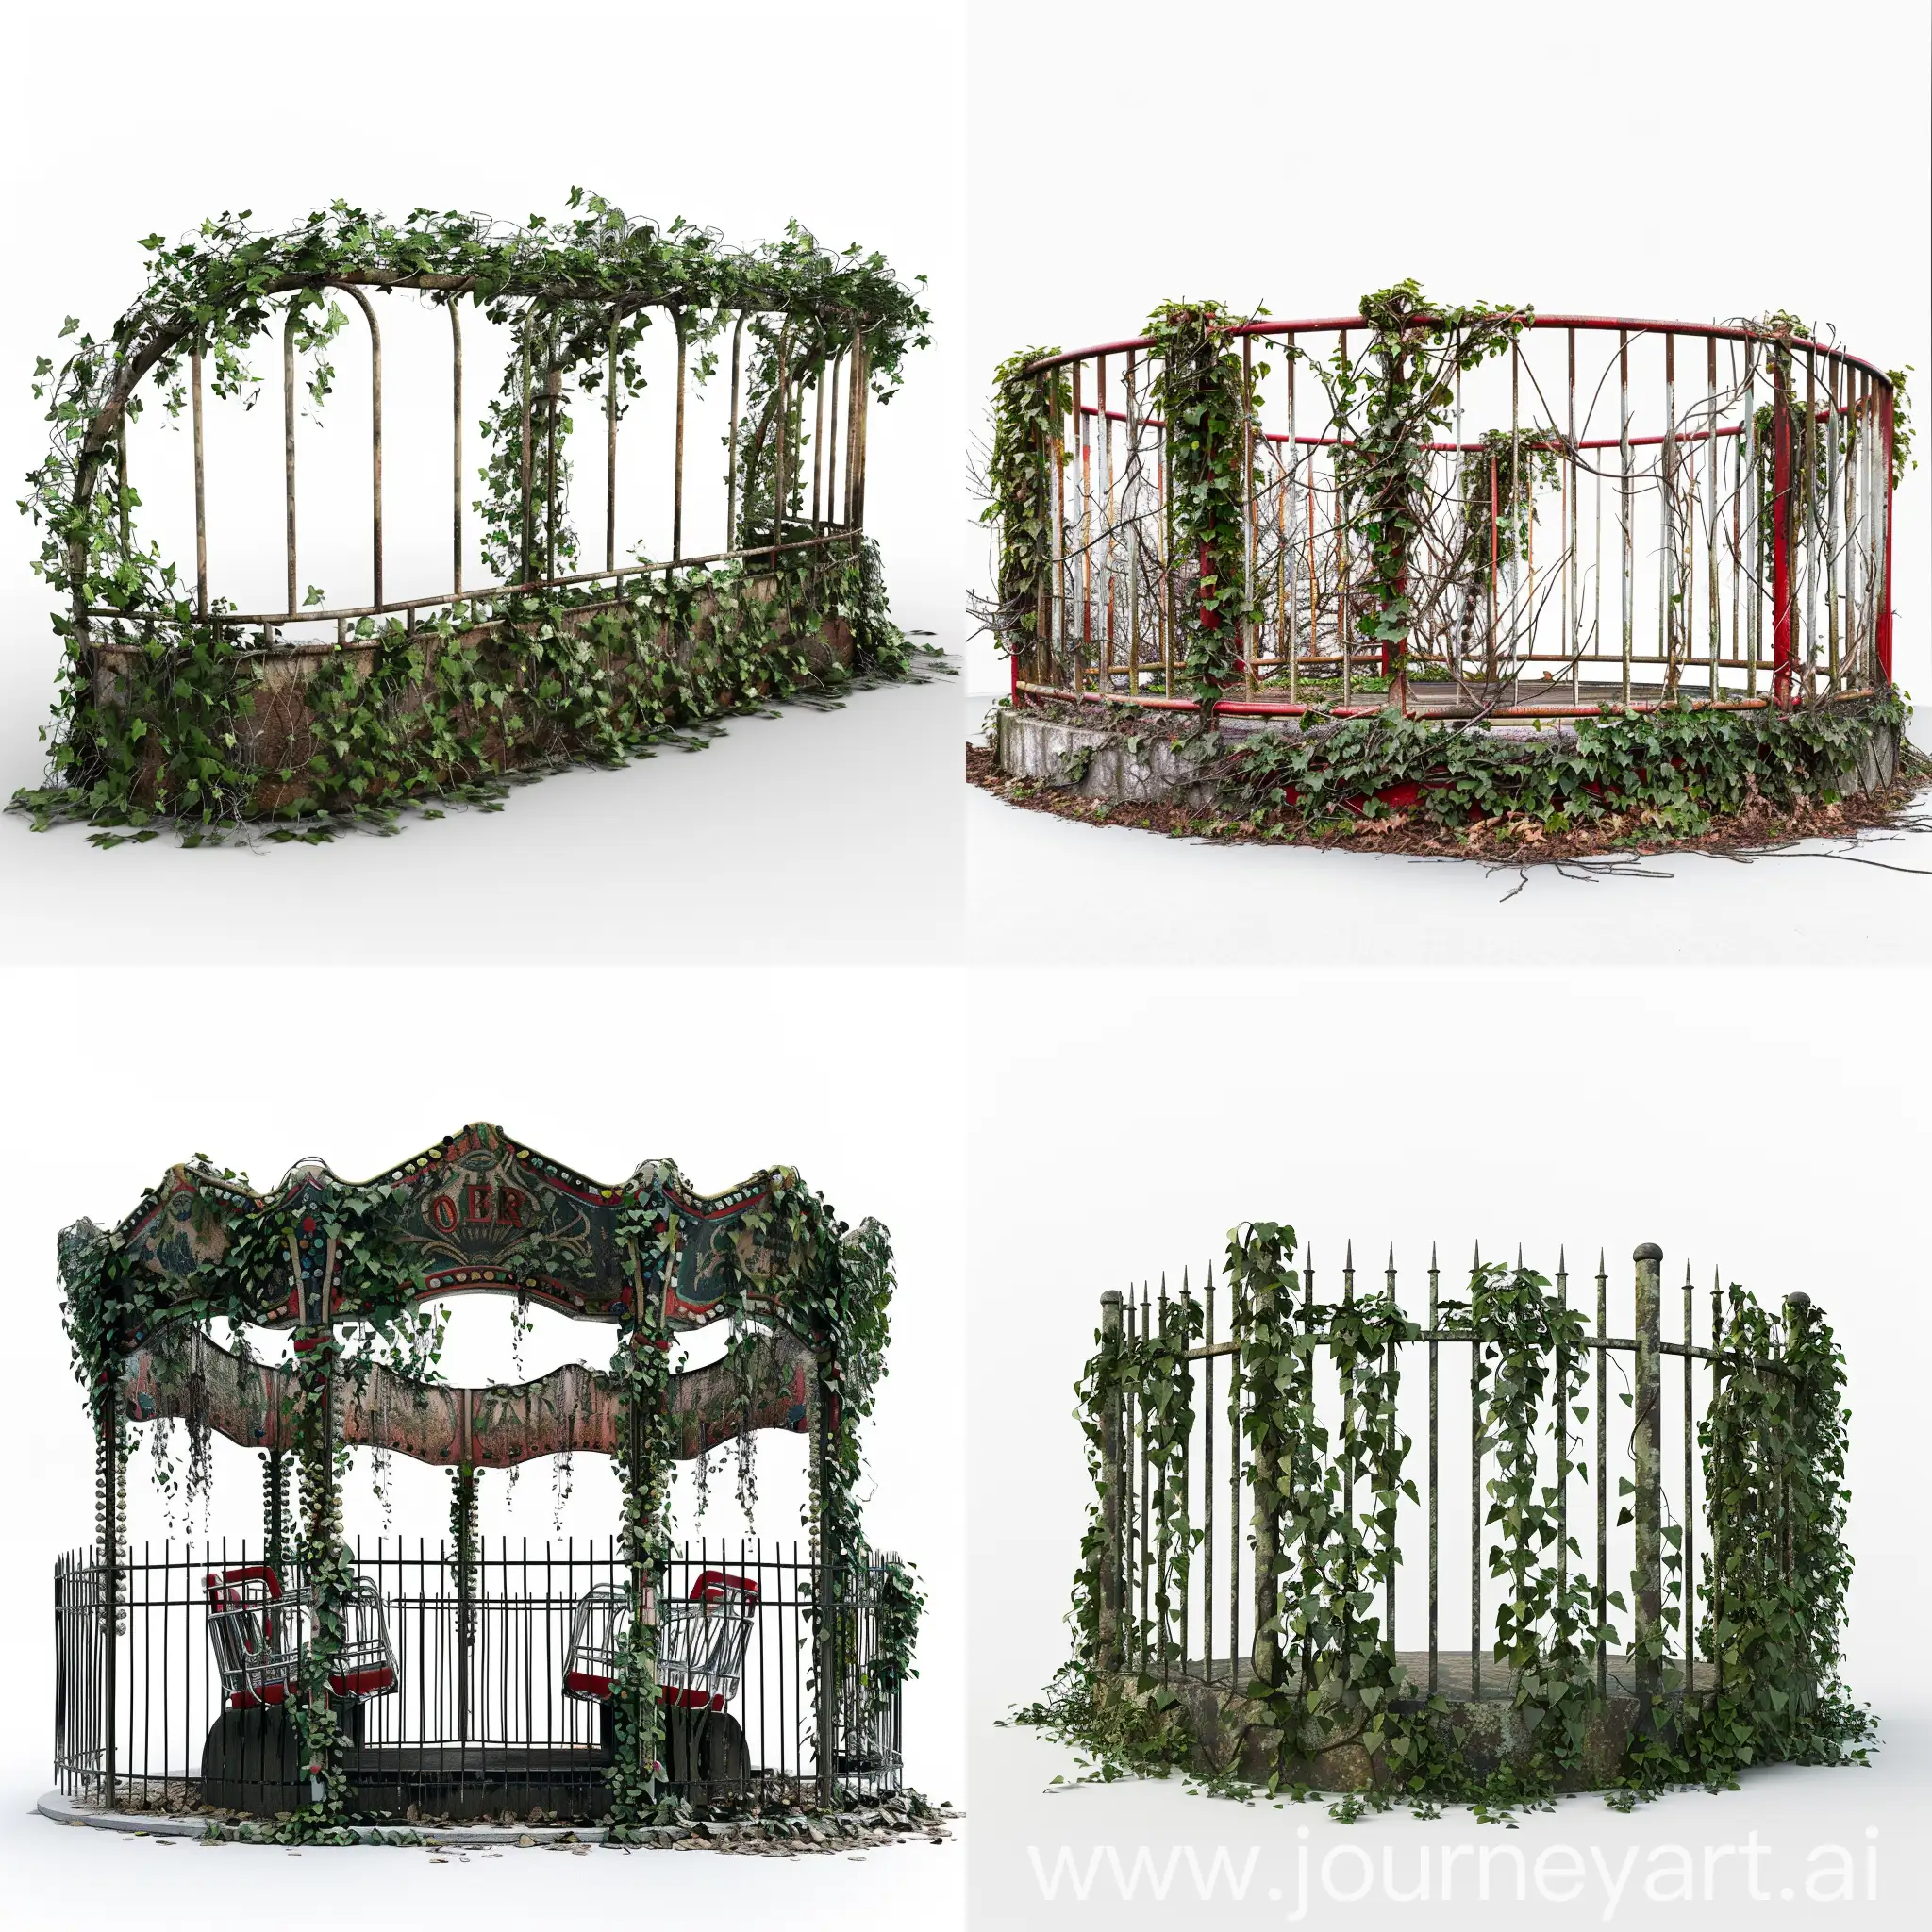 carnival ride fence. Covered with ivy. All on the white background with nothing around.